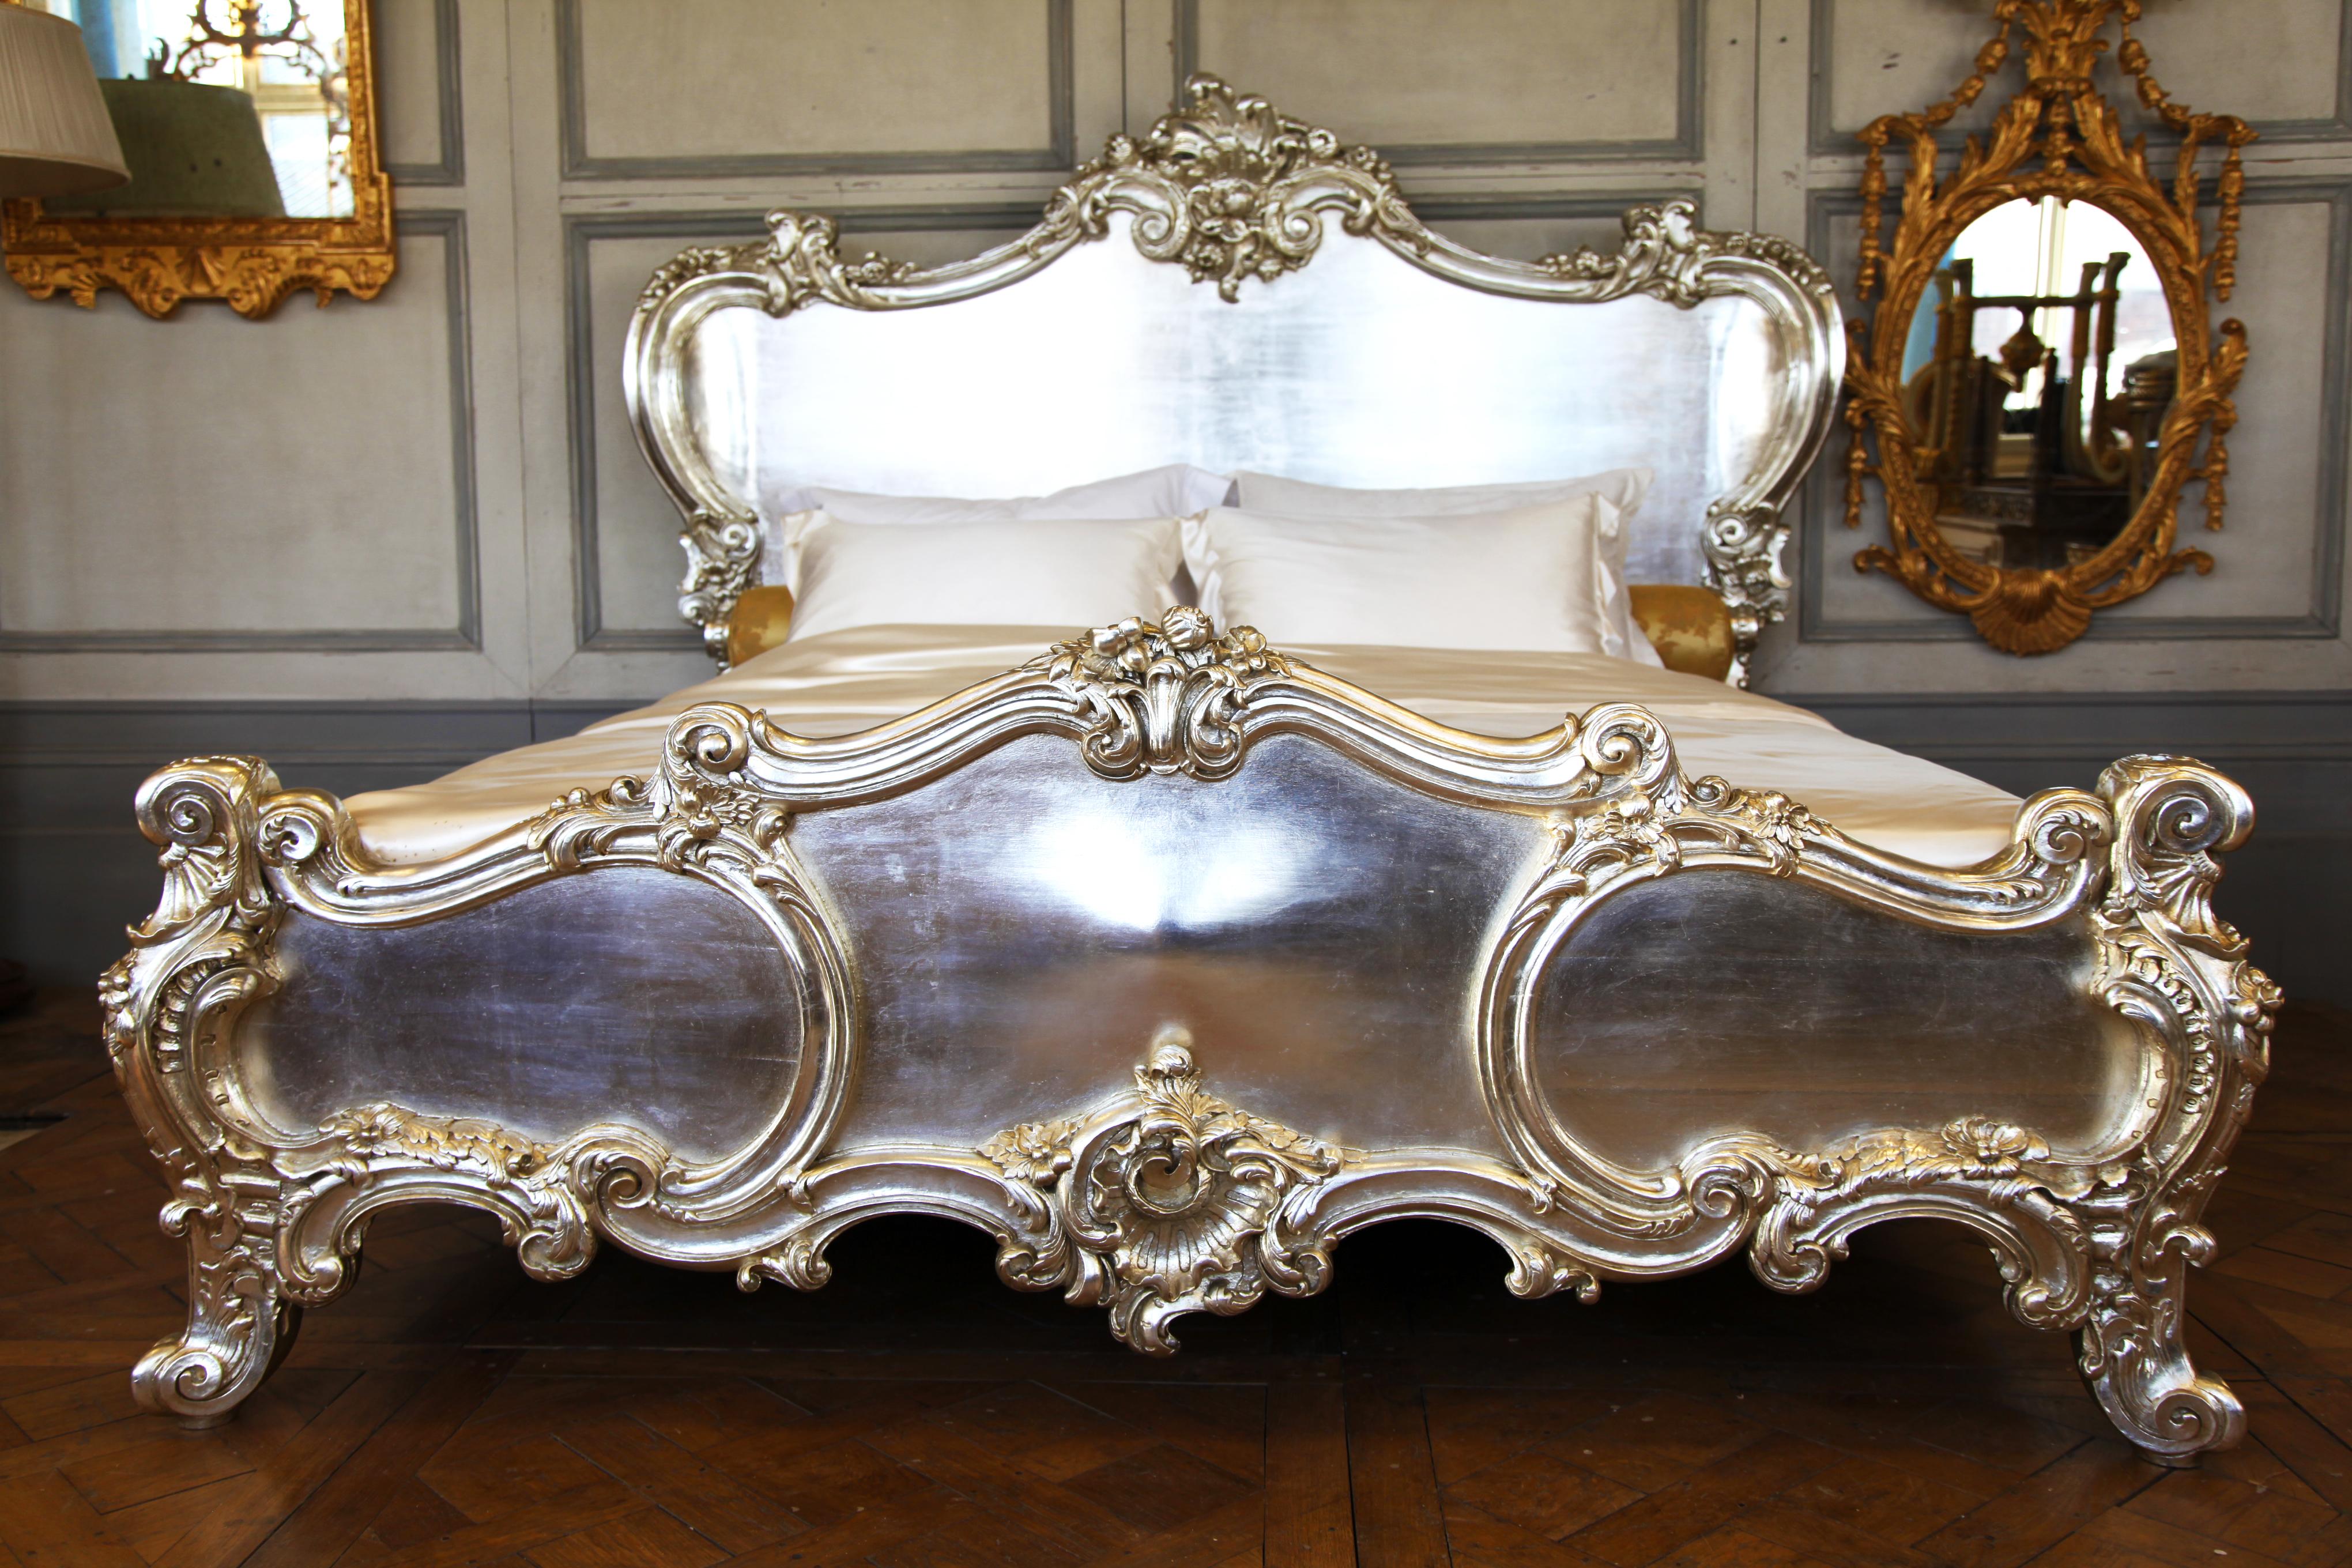 The Cherub Bed Hand Crafted In The Rococo Style Made By La Maison London 3